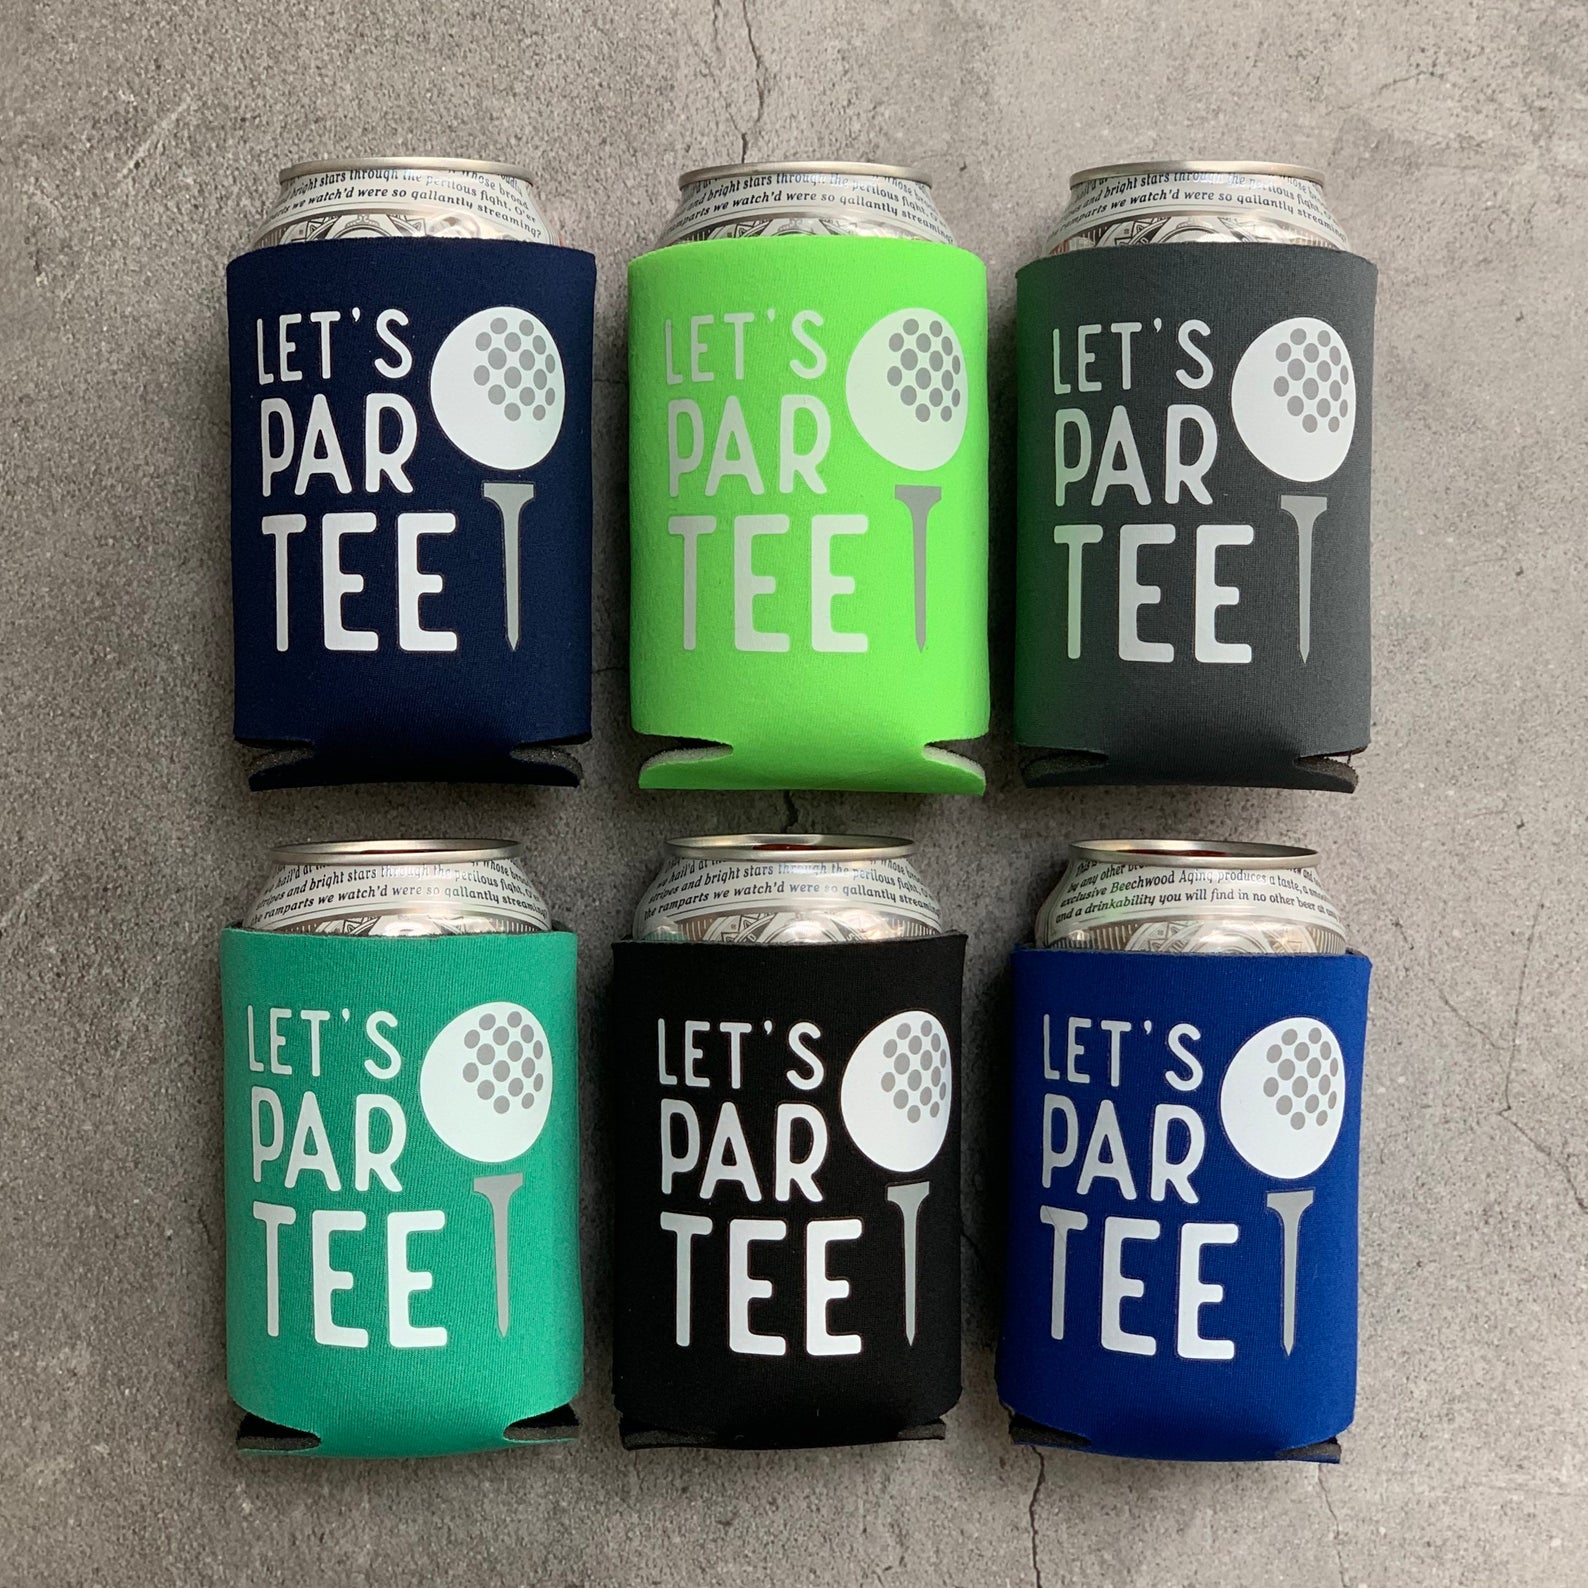 Let's Par Tee Beer Can Holders by Fringe Favaors